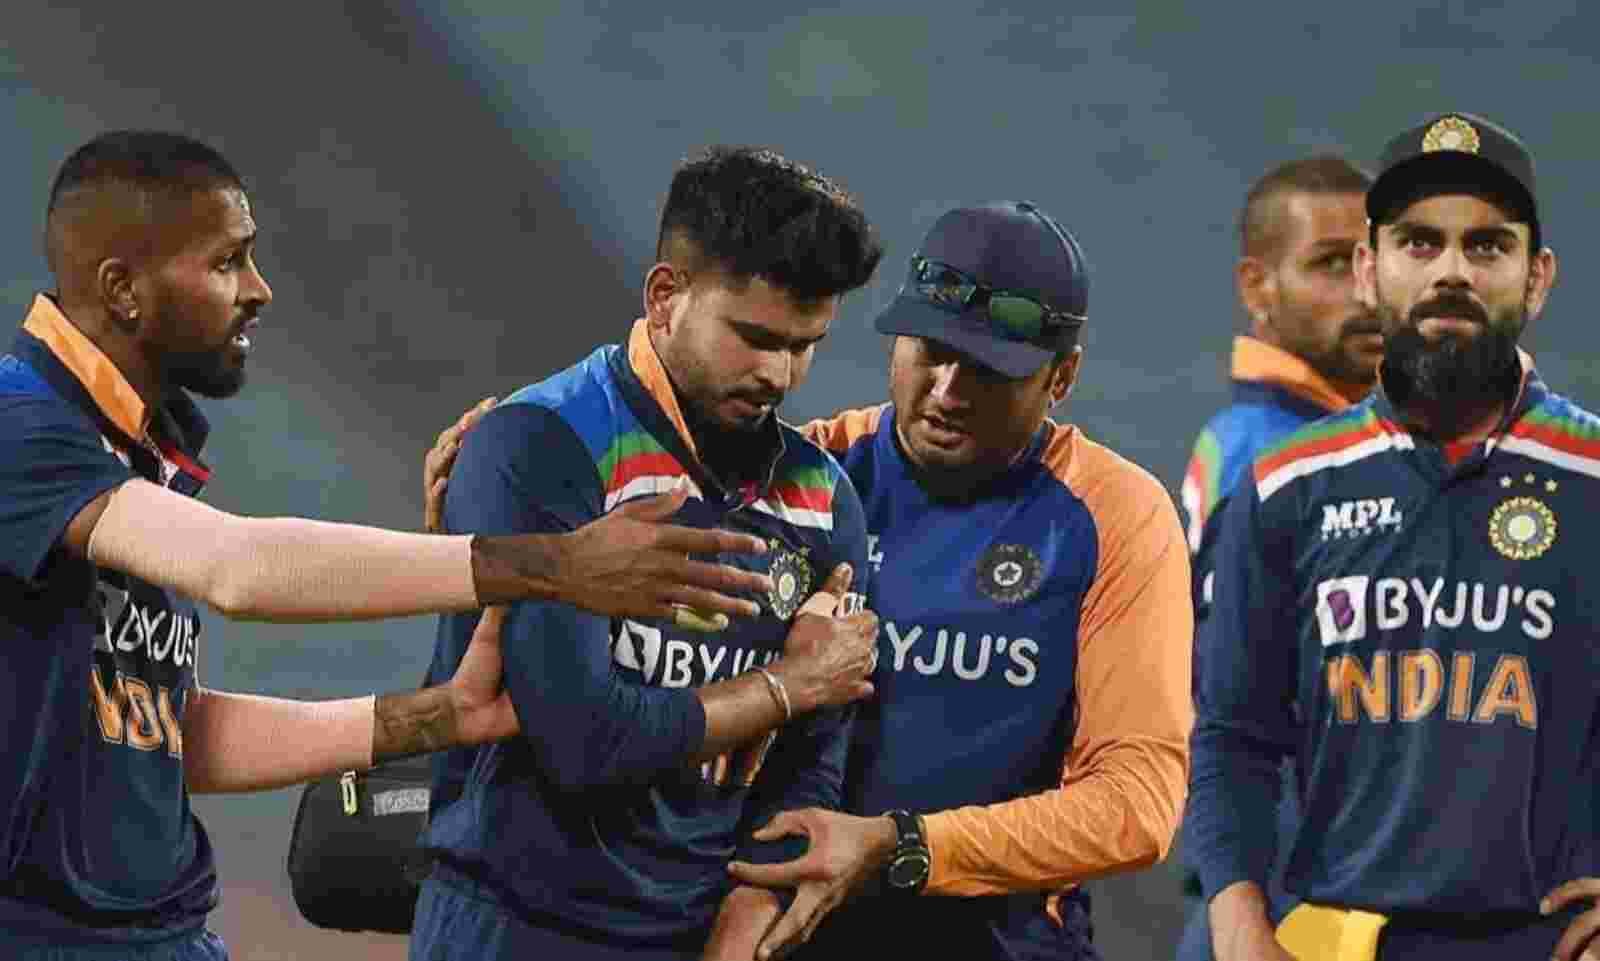 1600x960 1131 the greater the setback the stronger the comeback tweeted shreyas iyer source times of india